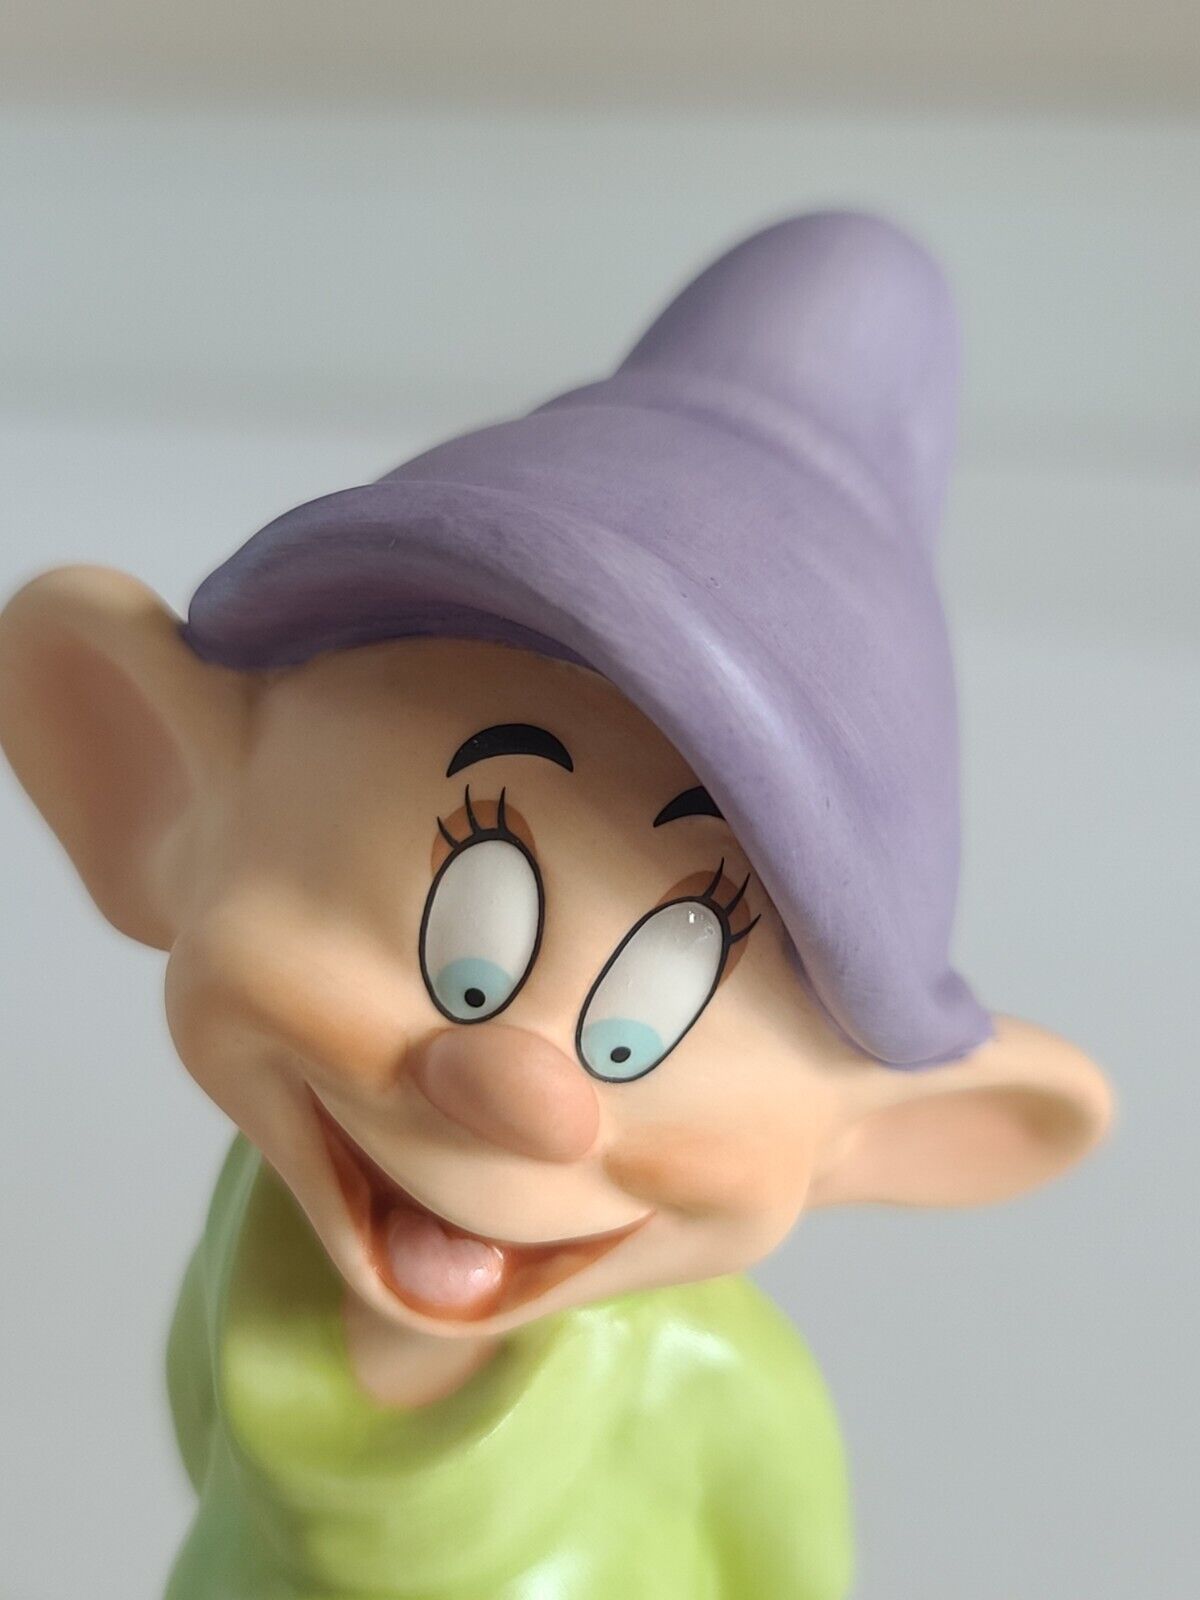 WDCC Dopey - Gleeful Grin+ pin | 4009982 | Disney\'s Snow White | New in Box